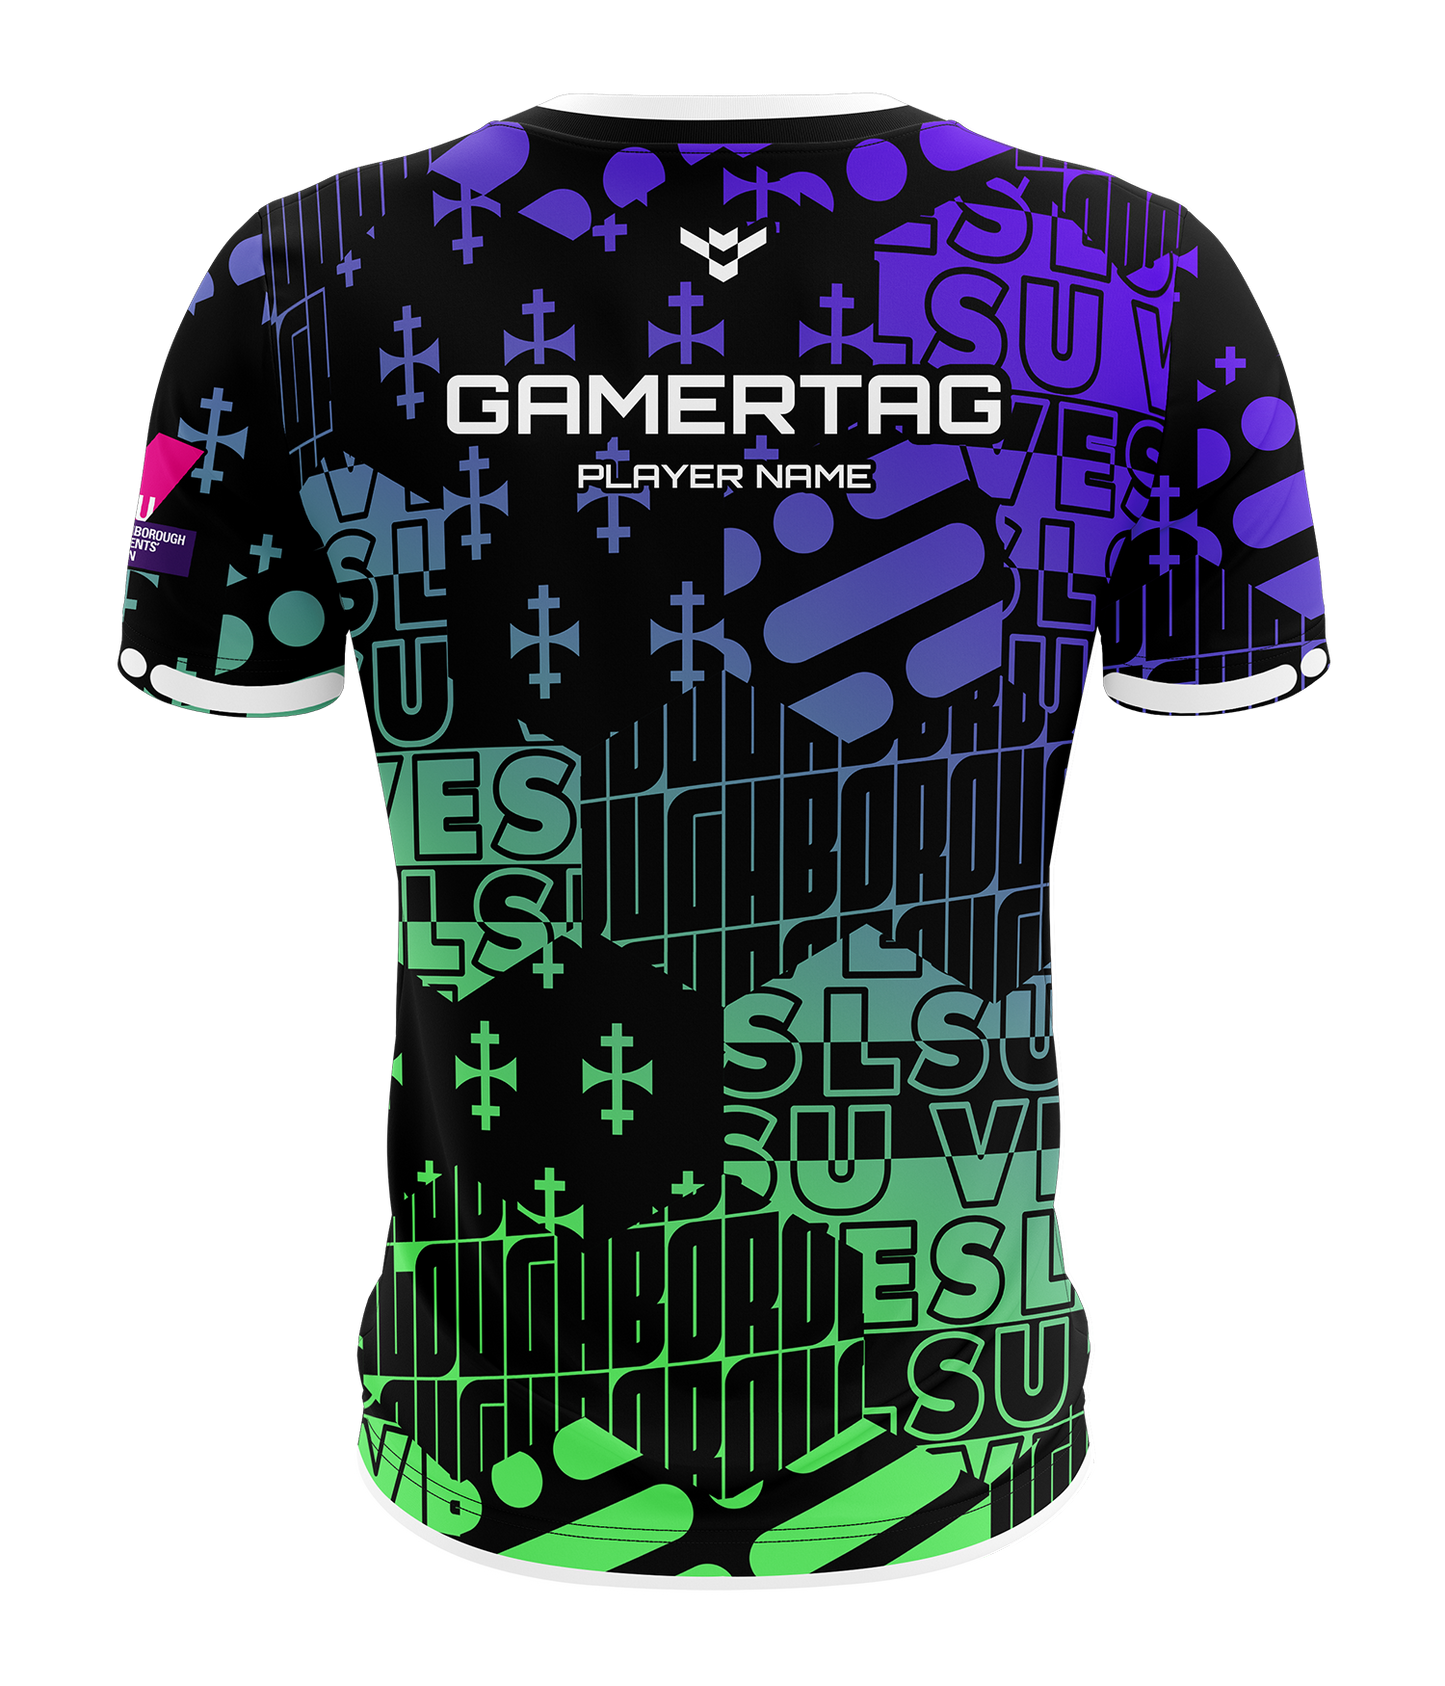 LSUVES Winter Edition Esports Jersey